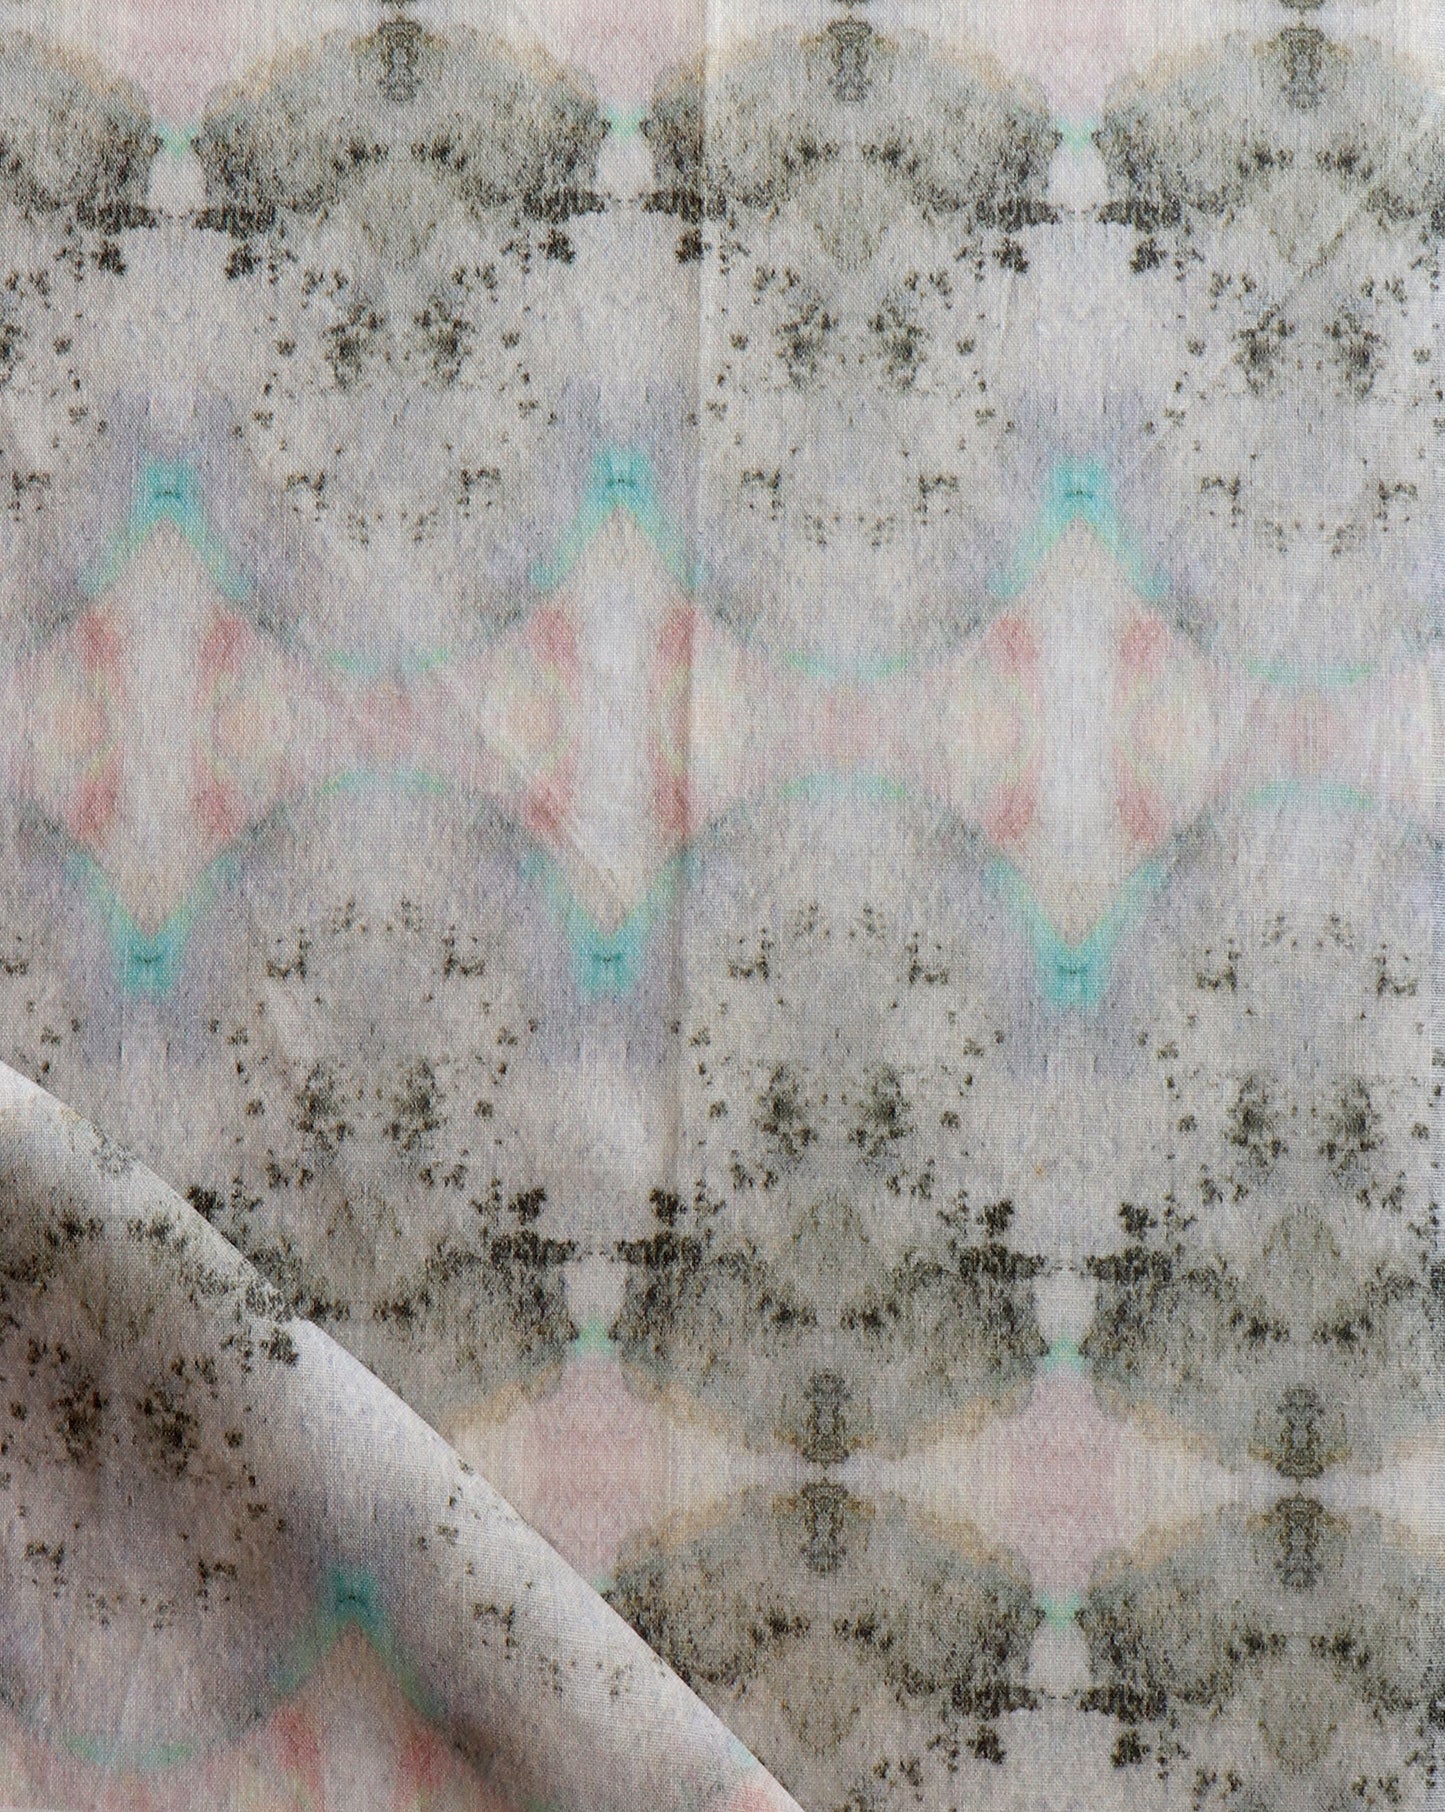 A piece of Parvati fabric from Eskayel’s Dea Collection, featuring watercolor pigments in pink, green, and blue